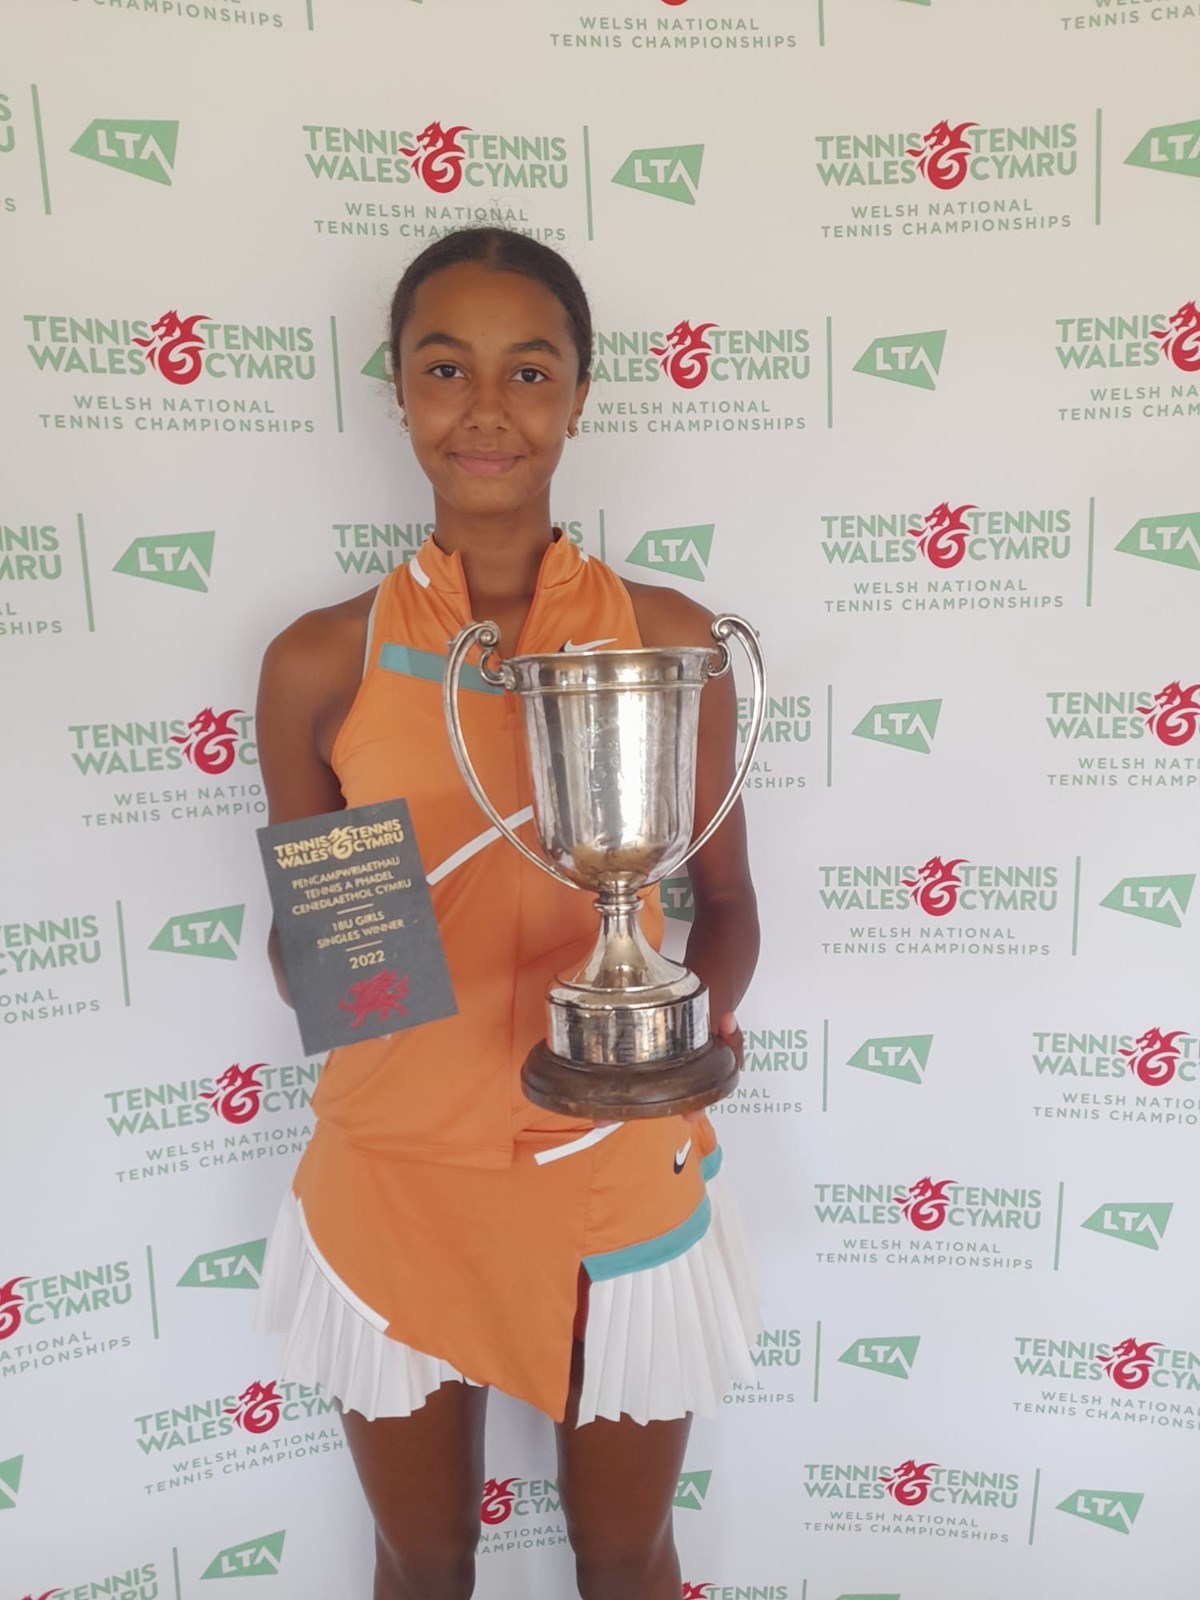 Girl posing with her tennis award infront of the tennis wales backdrop